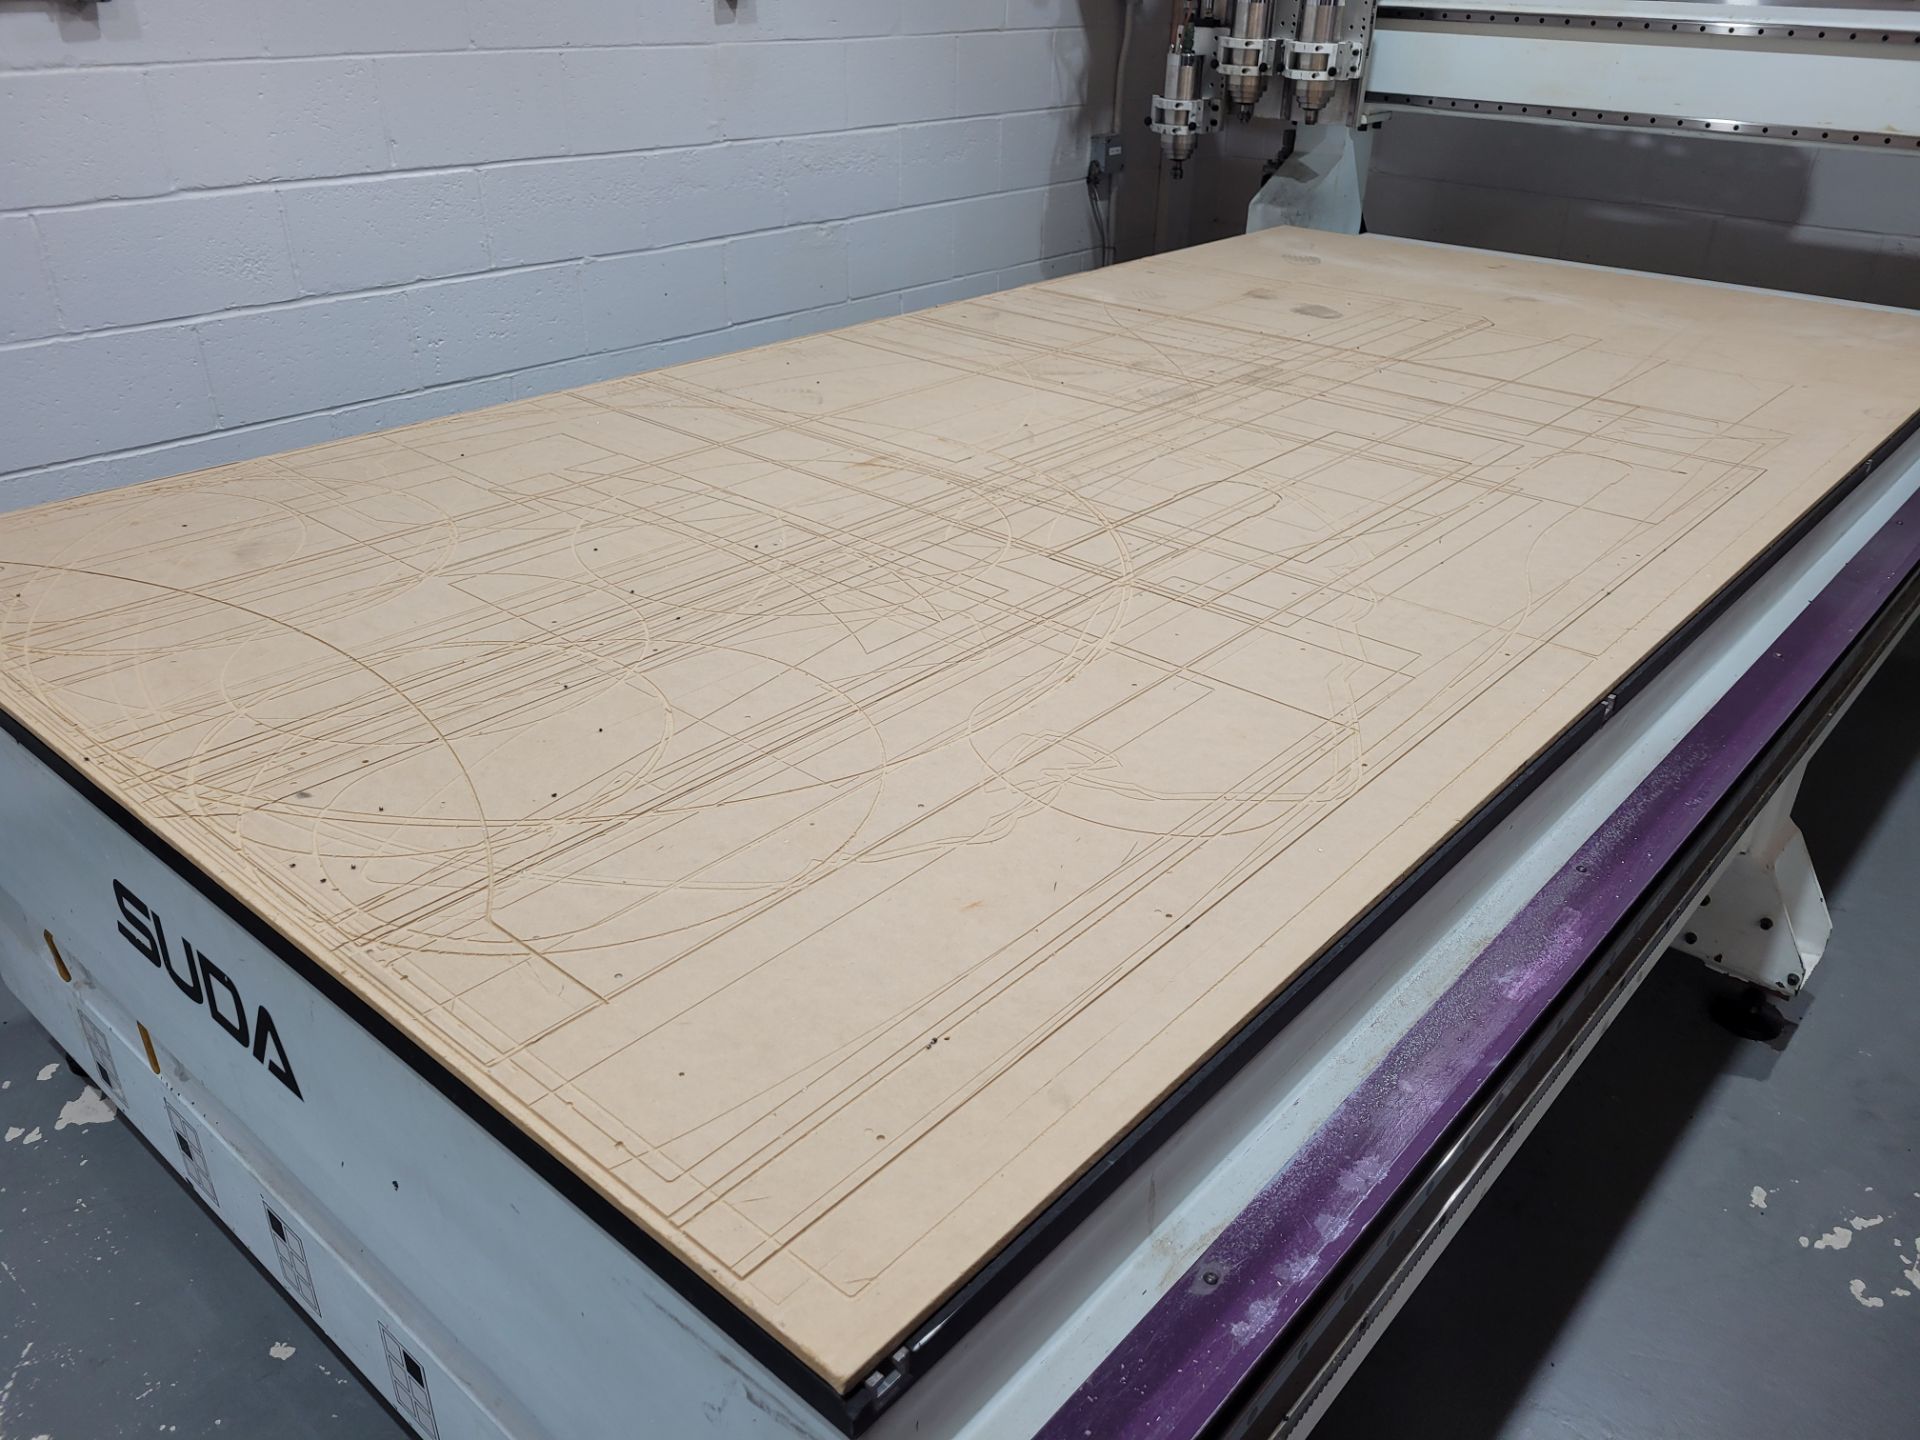 2015 SUDA ATC CNC Router mod. MG1630C, 3-Head System with Accessories and CRAFTEX mod. FM-300 Collec - Image 14 of 51